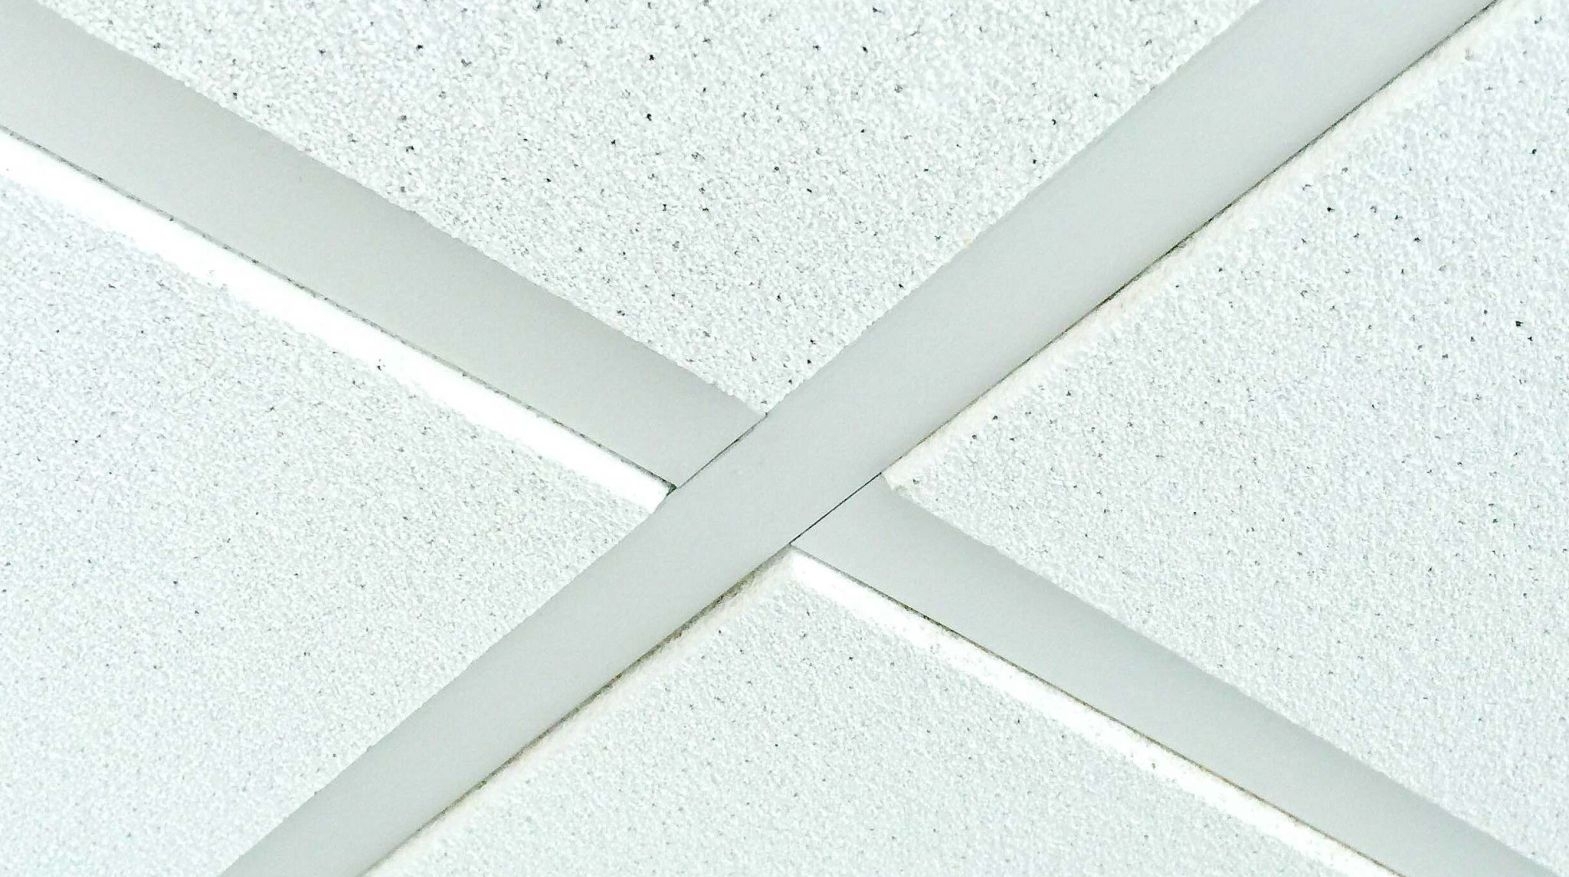 Armstrong Cortega Ceiling Tiles Second Look